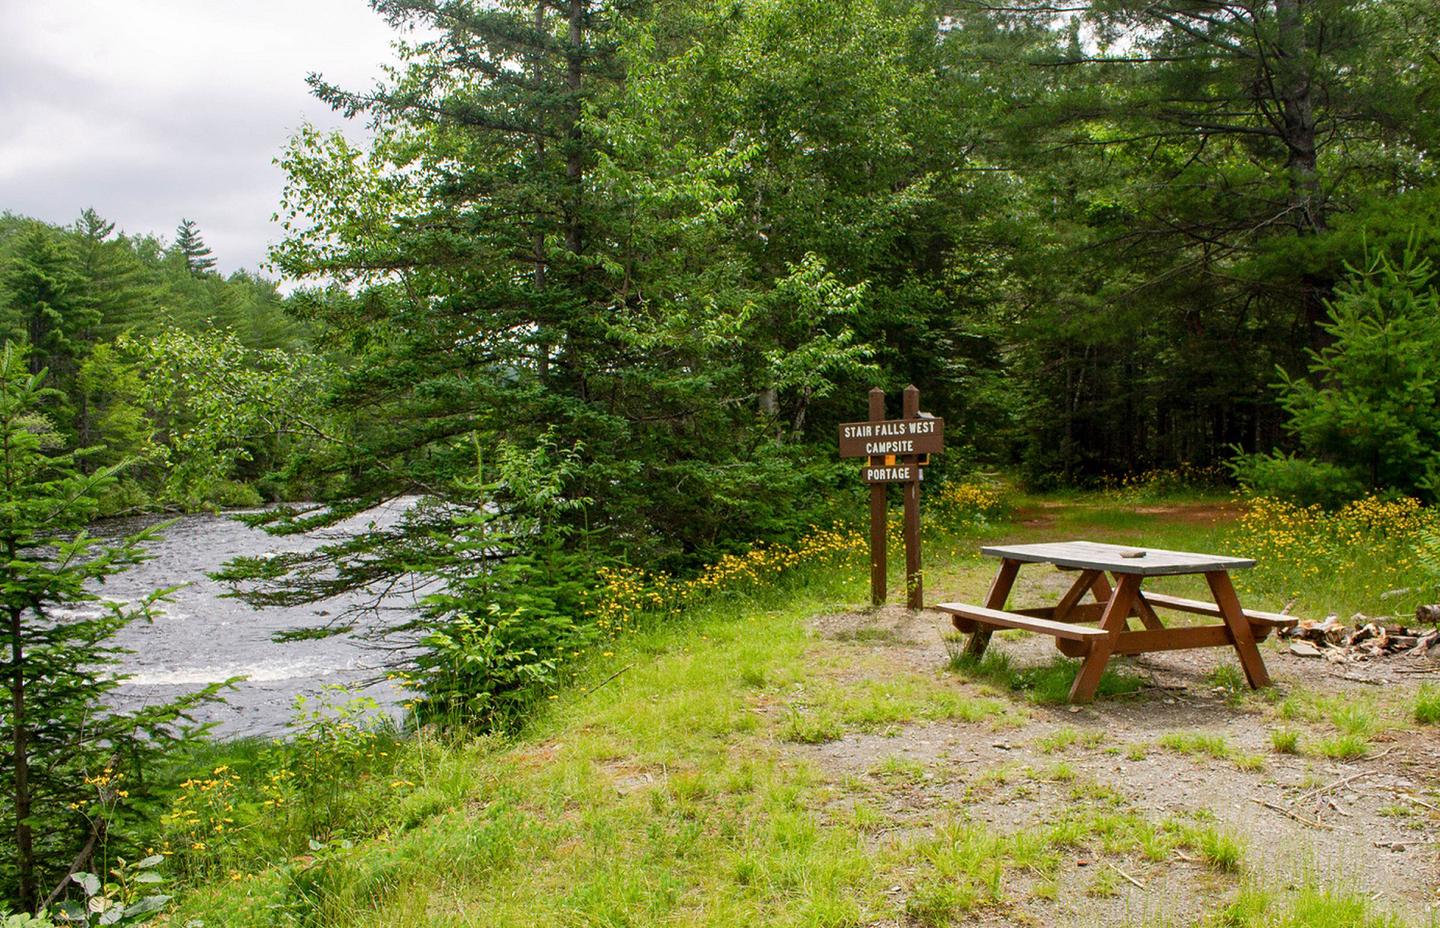 A river runs below a gravel campsite to the left. A brown wooden sign shows Stair Falls Campsite and Portage. A wooden picnic table is available on the right for visitor use with firewood next to it. A dirt trail extends into the shaded forest behind the campsite..Stair Falls Campsite is located on the East Branch Penobscot River near the portage trail.